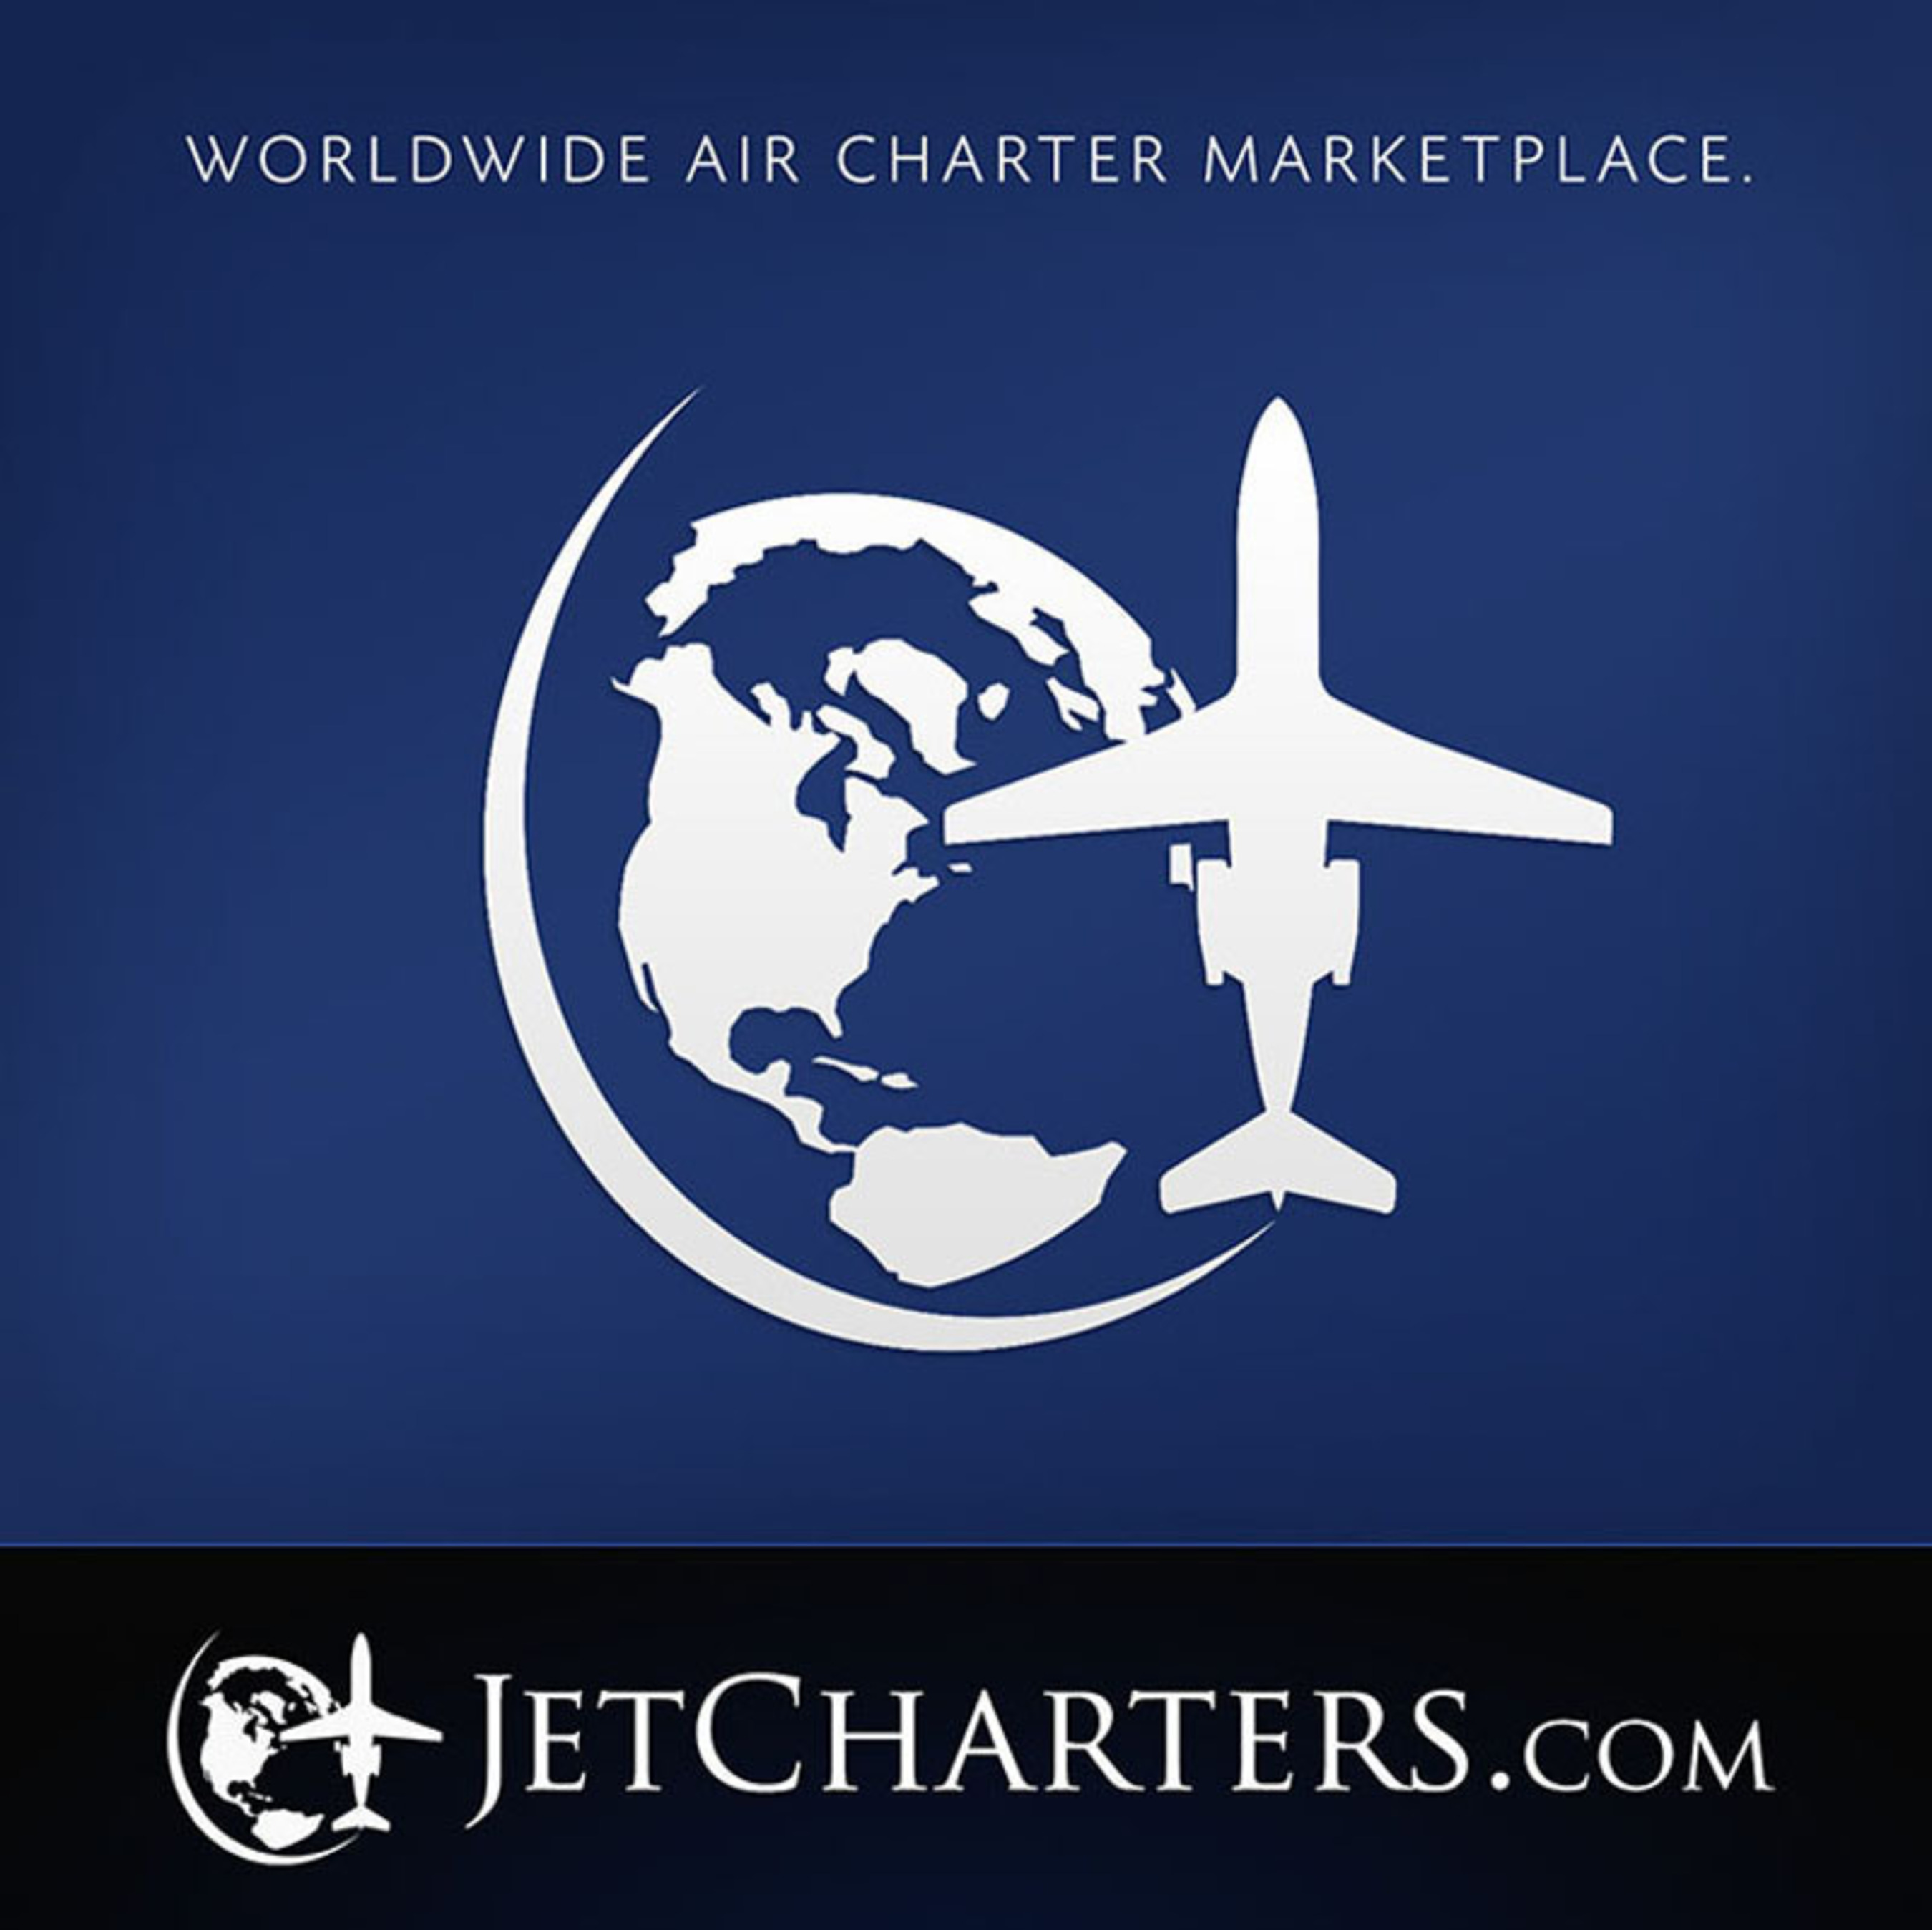 Worldwide Air Charter Marketplace JetCharters.com is Committed to Traveler Safety. (PRNewsFoto/JetCharters.com) (PRNewsFoto/JETCHARTERS.COM)